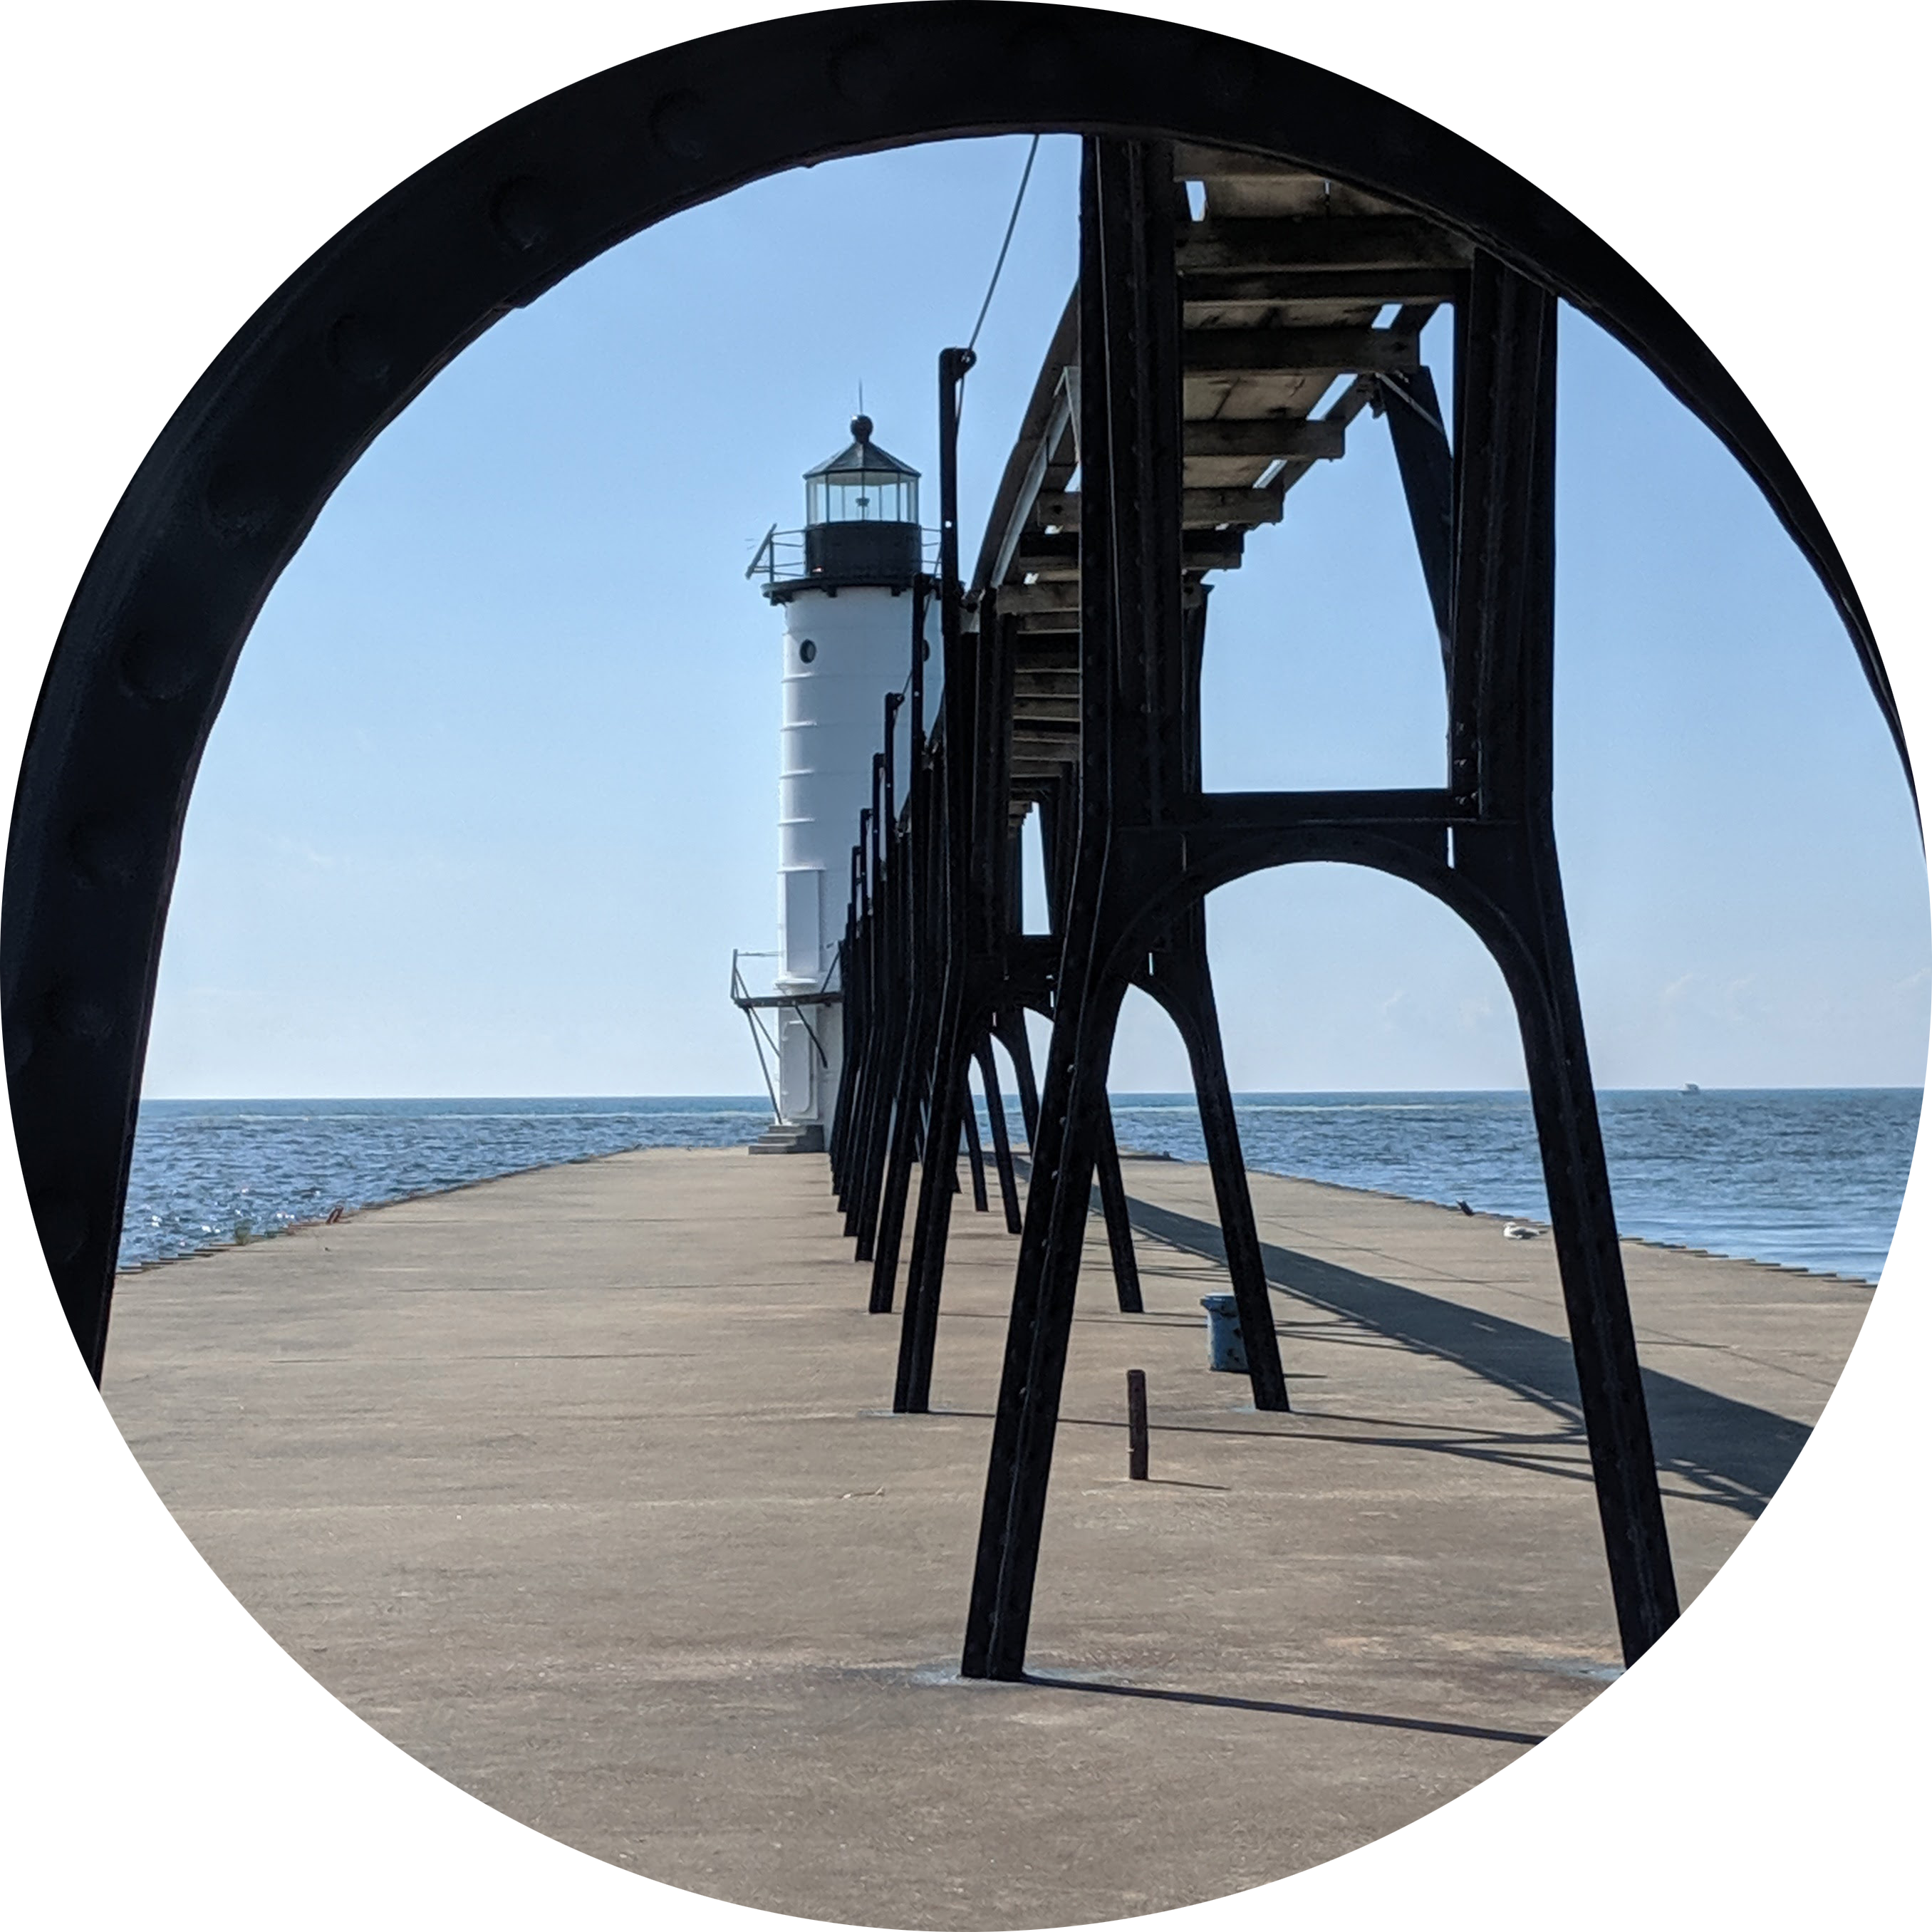 Photo of a lighthouse Framed by a pier support in the foreground